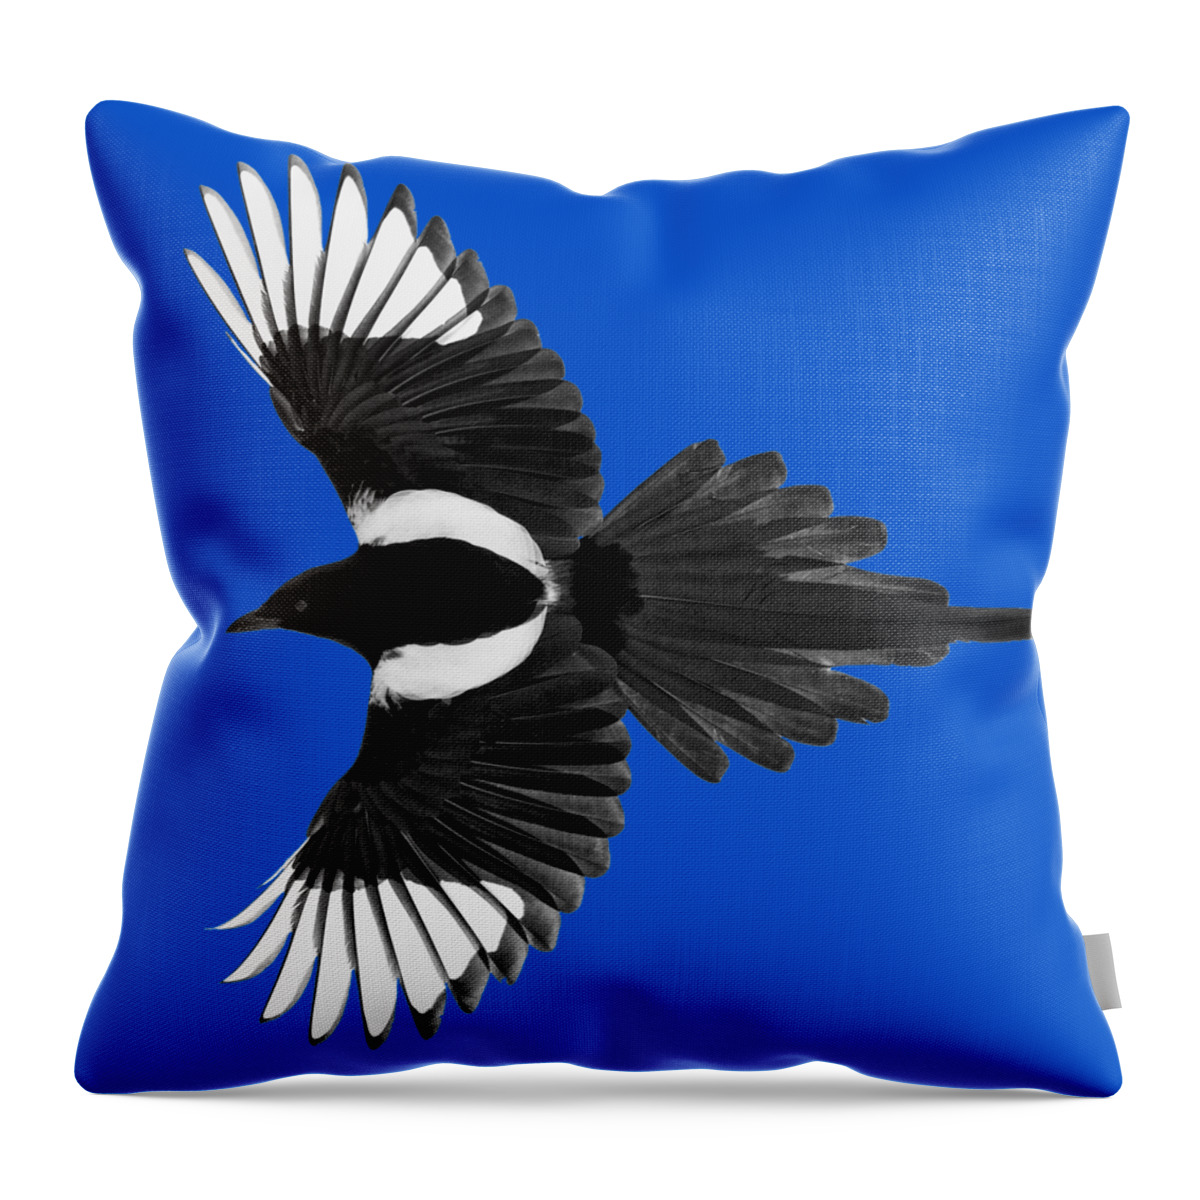 Magpie Throw Pillow featuring the photograph Magpie Shirt Design by Max Waugh